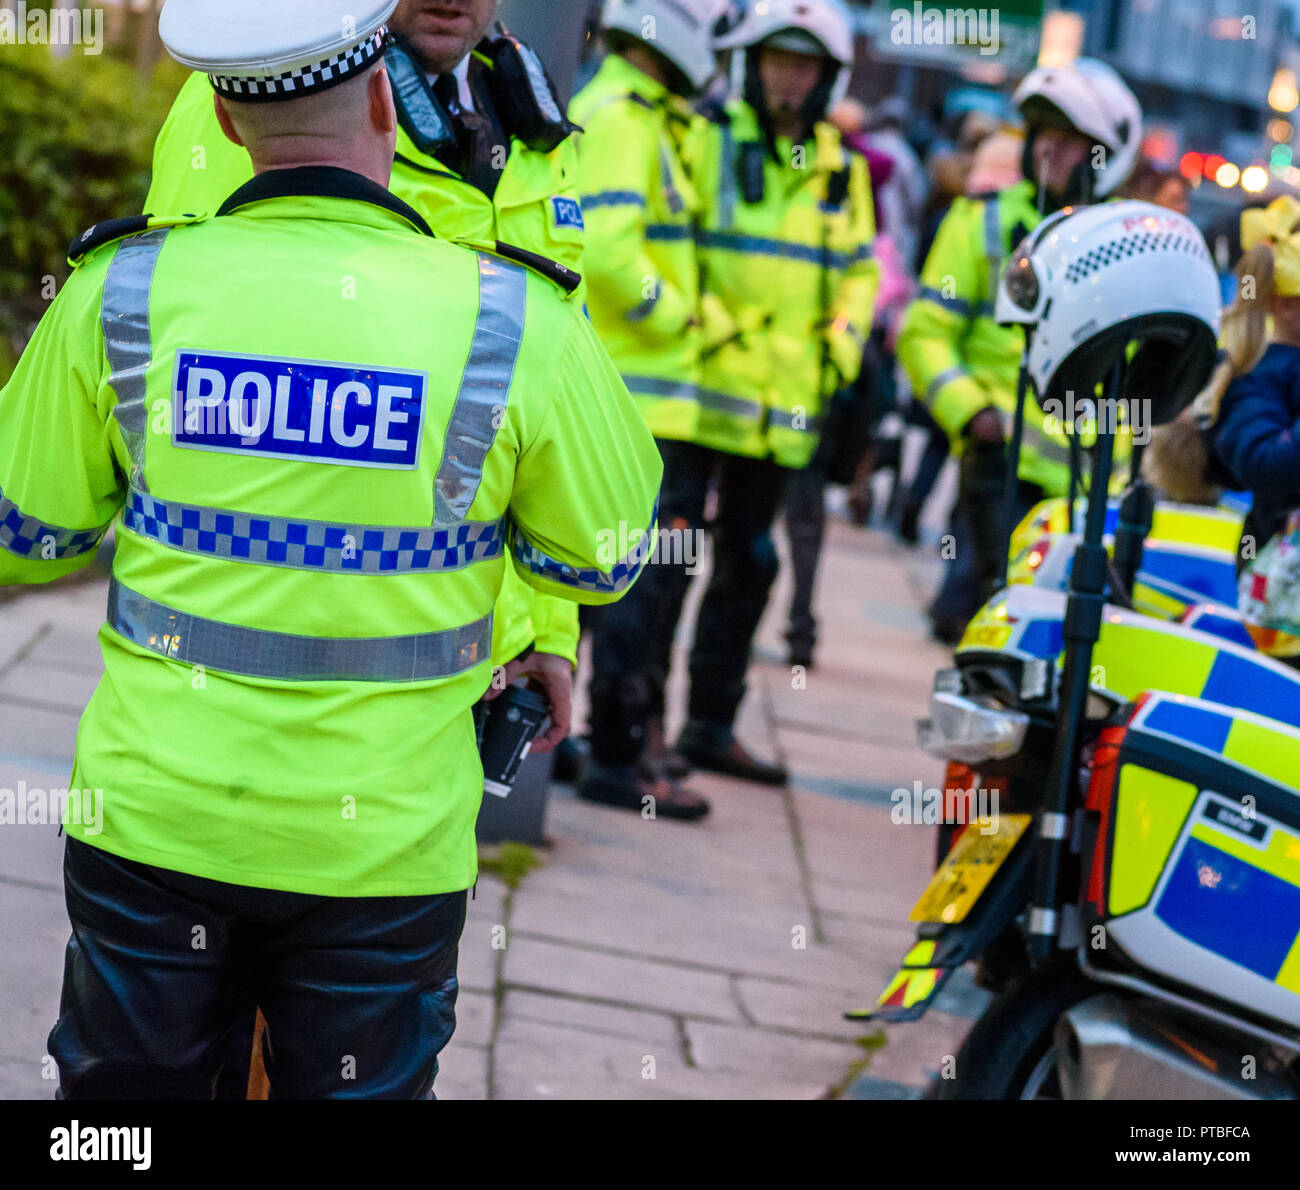 A group of police with motorcycles in Liverpool city centre. Stock Photo